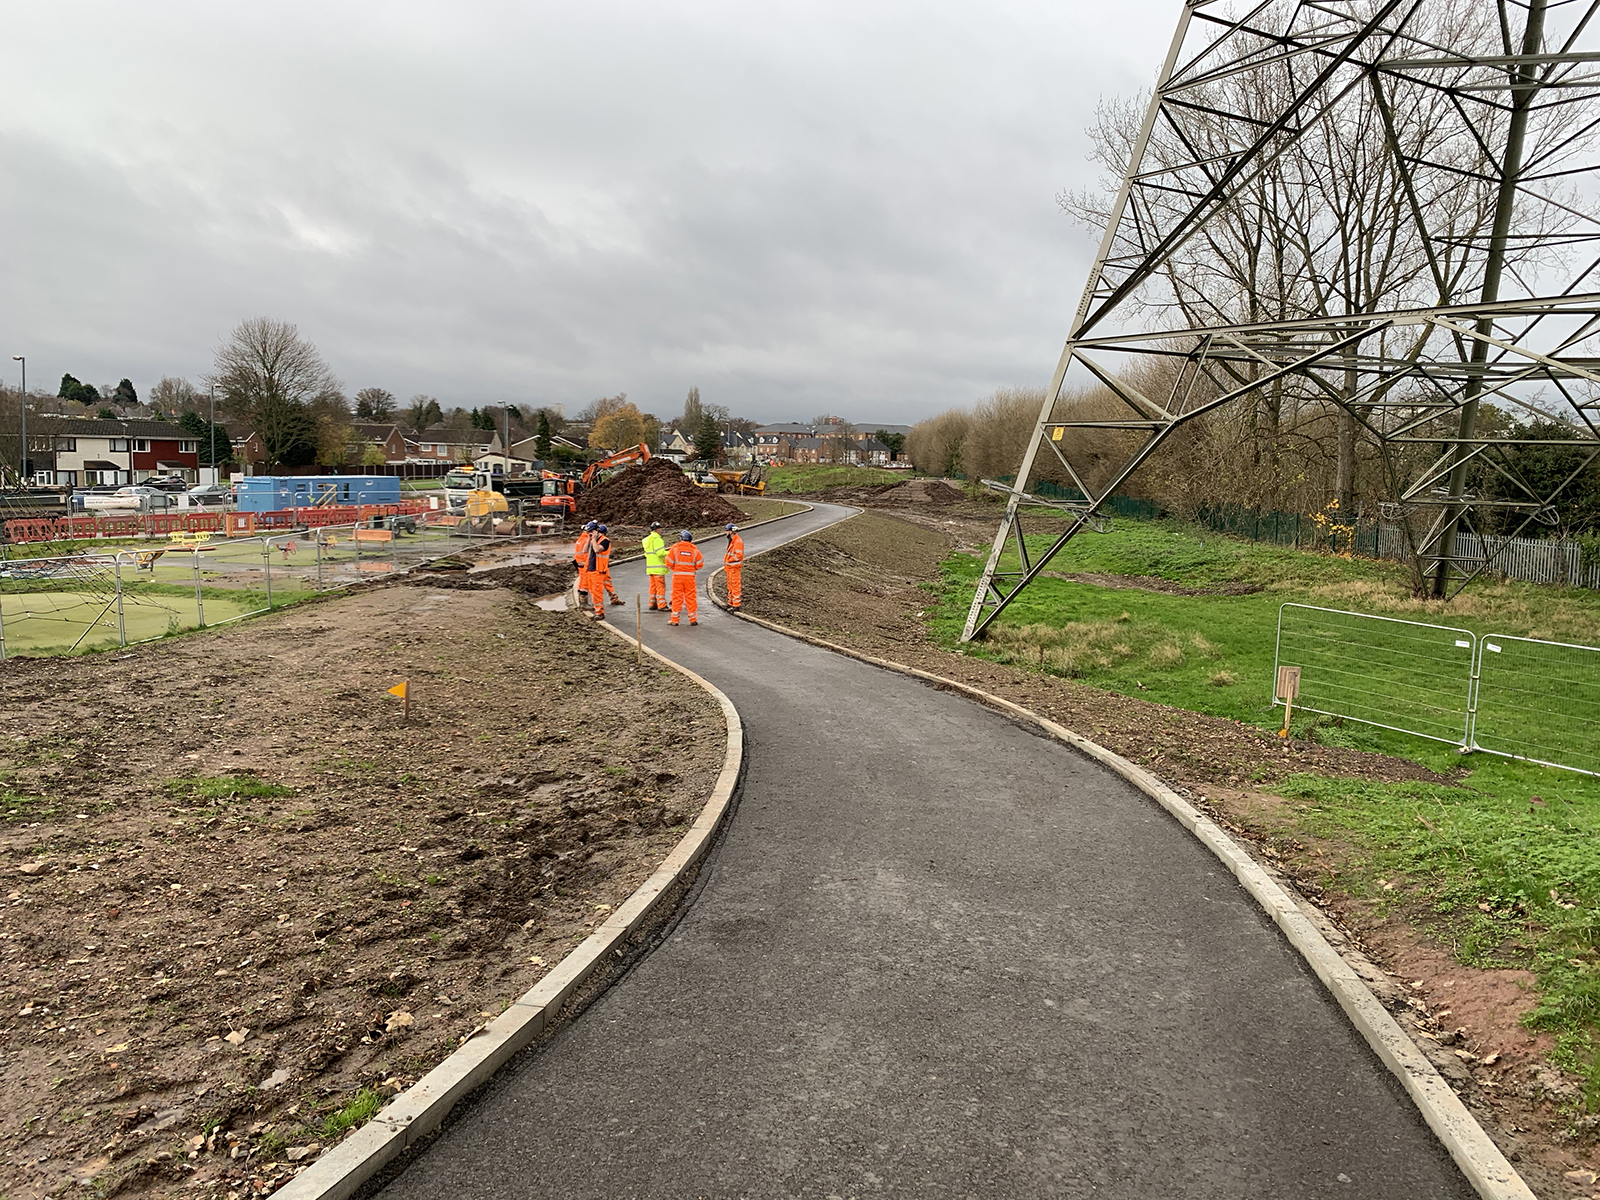 Photo shows the low carbon asphalt cycle path - Bromford. This image was taken before social distancing rules came into effect.